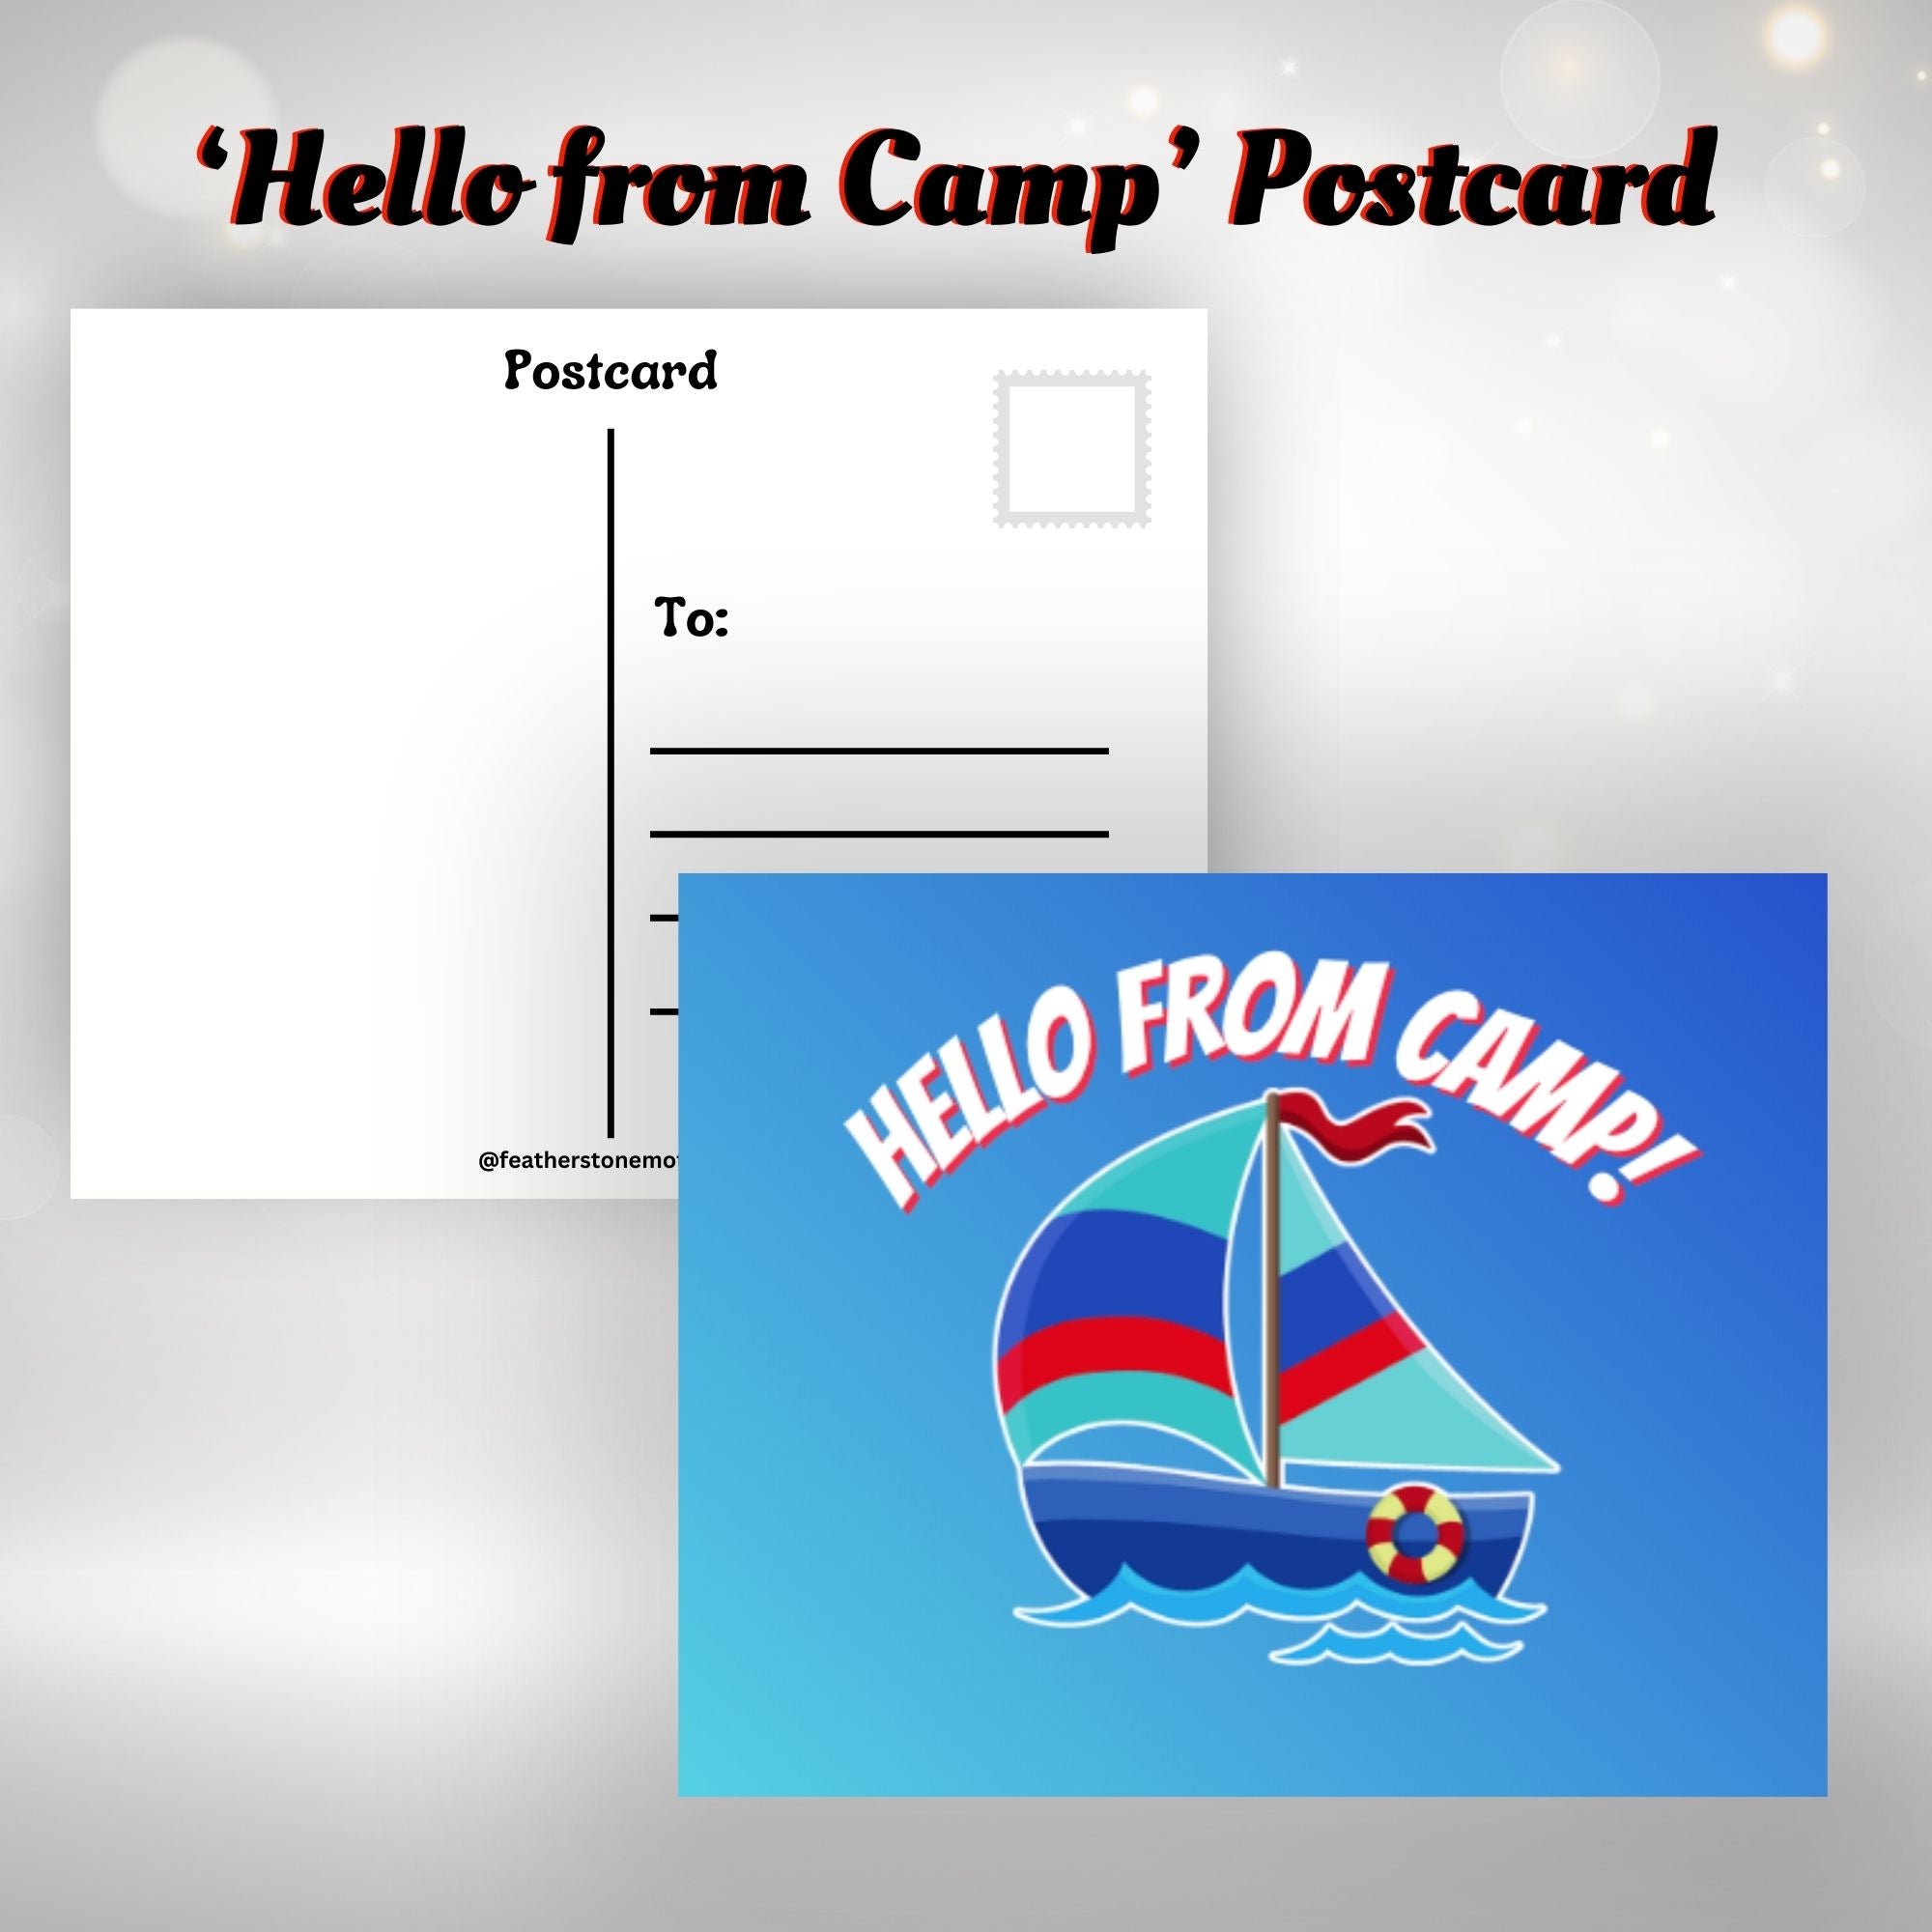 This image shows the Hello from Camp! postcard with a sailboat on a darker blue background.